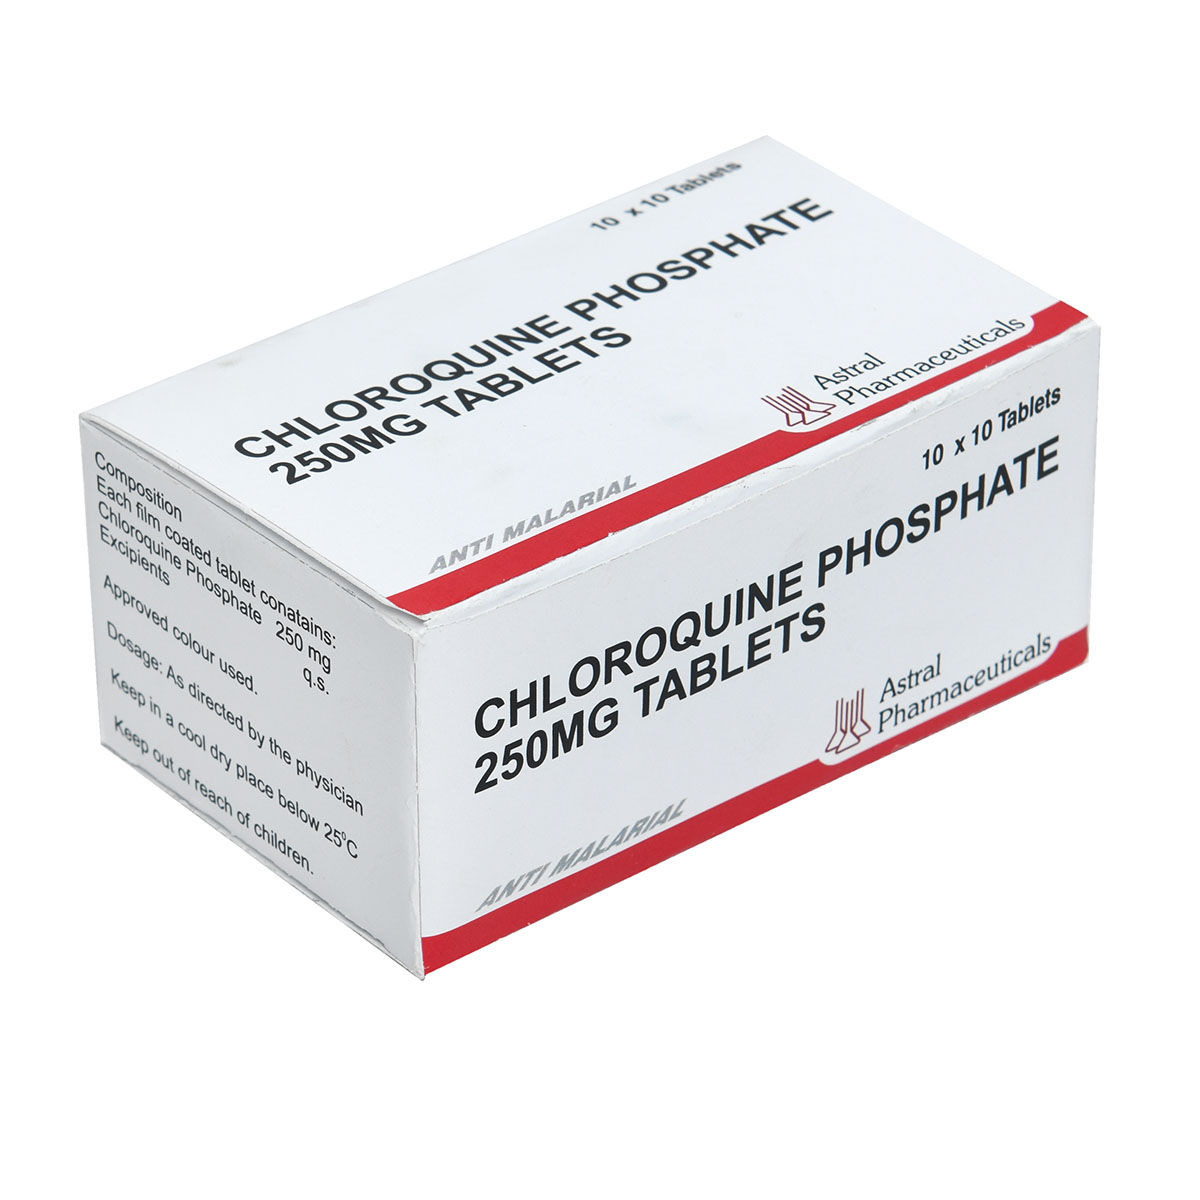 Latest On Coronavirus Drug Research: Chloroquine Another Potential ...